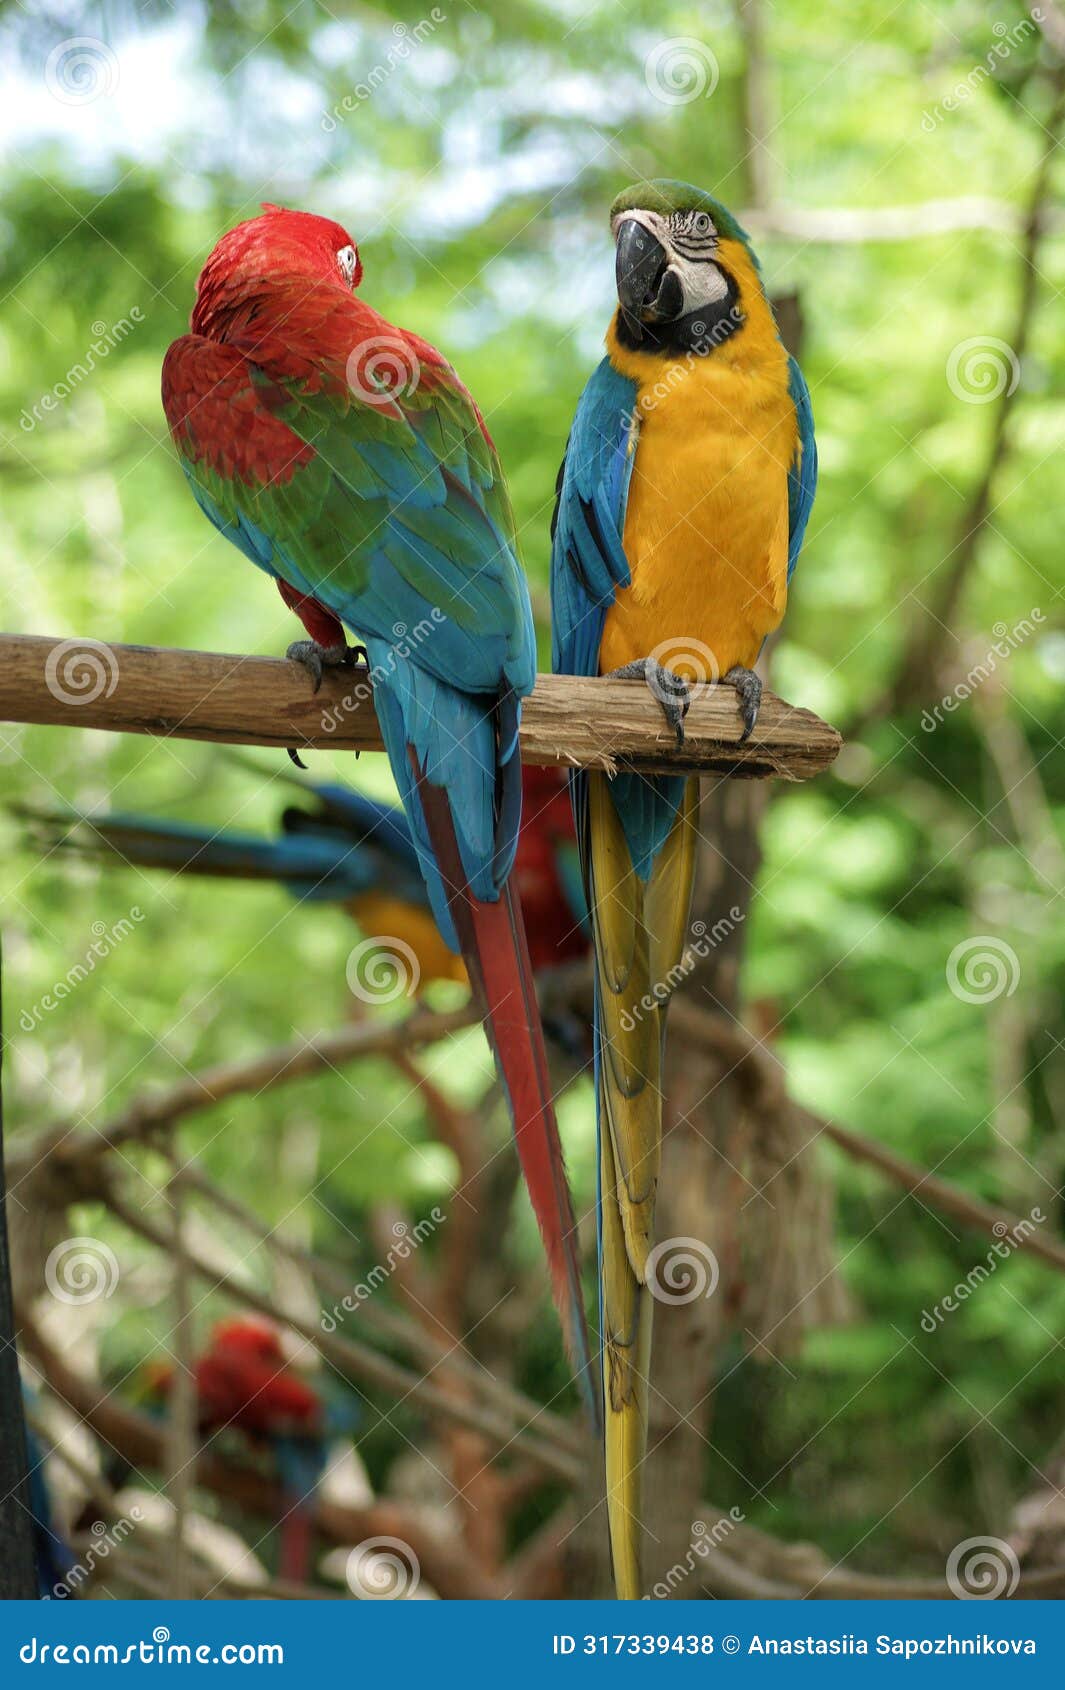 two macaw parrots siting on a tree branch and looking at each other in manati park, bavaro-punta cana, republica